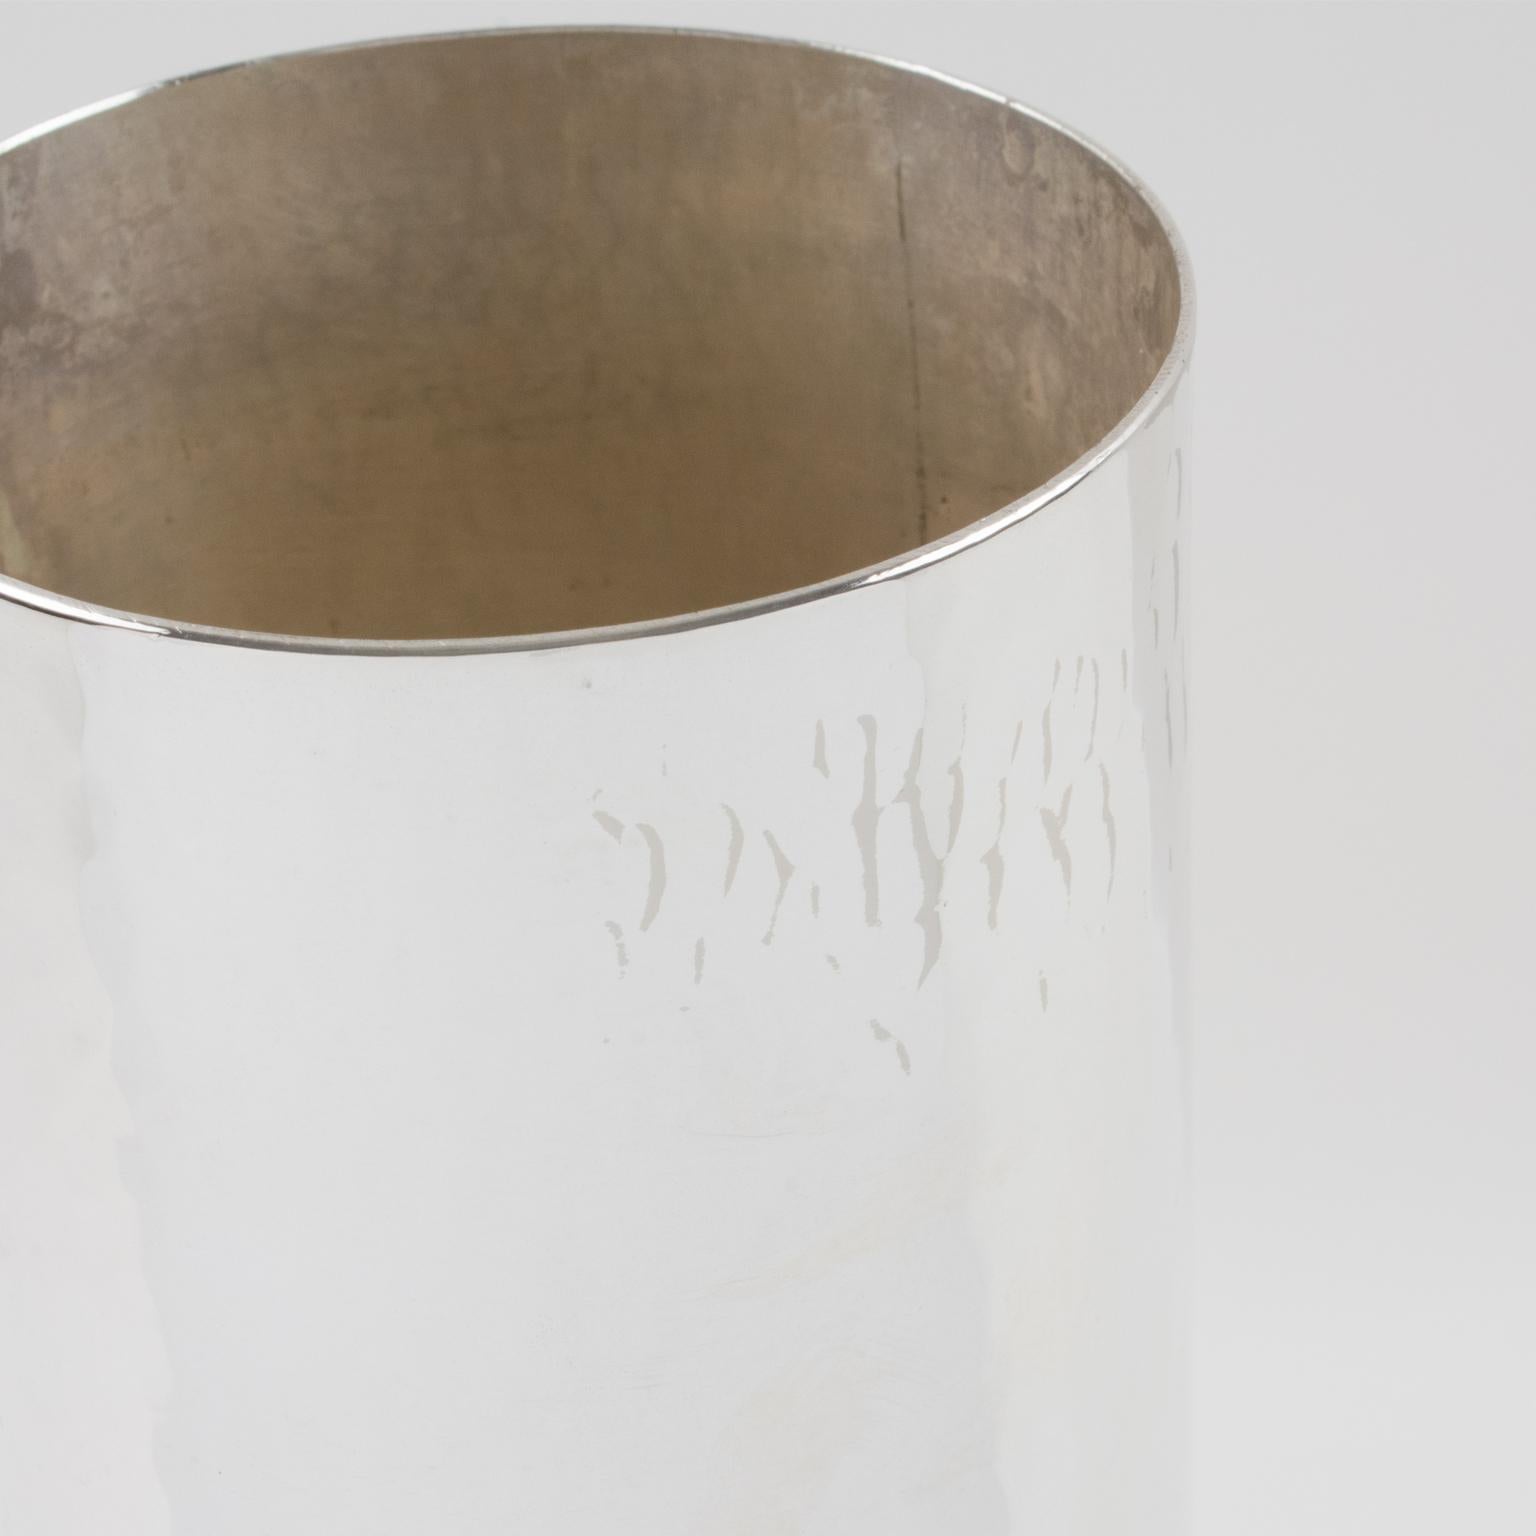 Silver Plate Embossed Tall Tumbler Vase, Italy 1980s For Sale 2